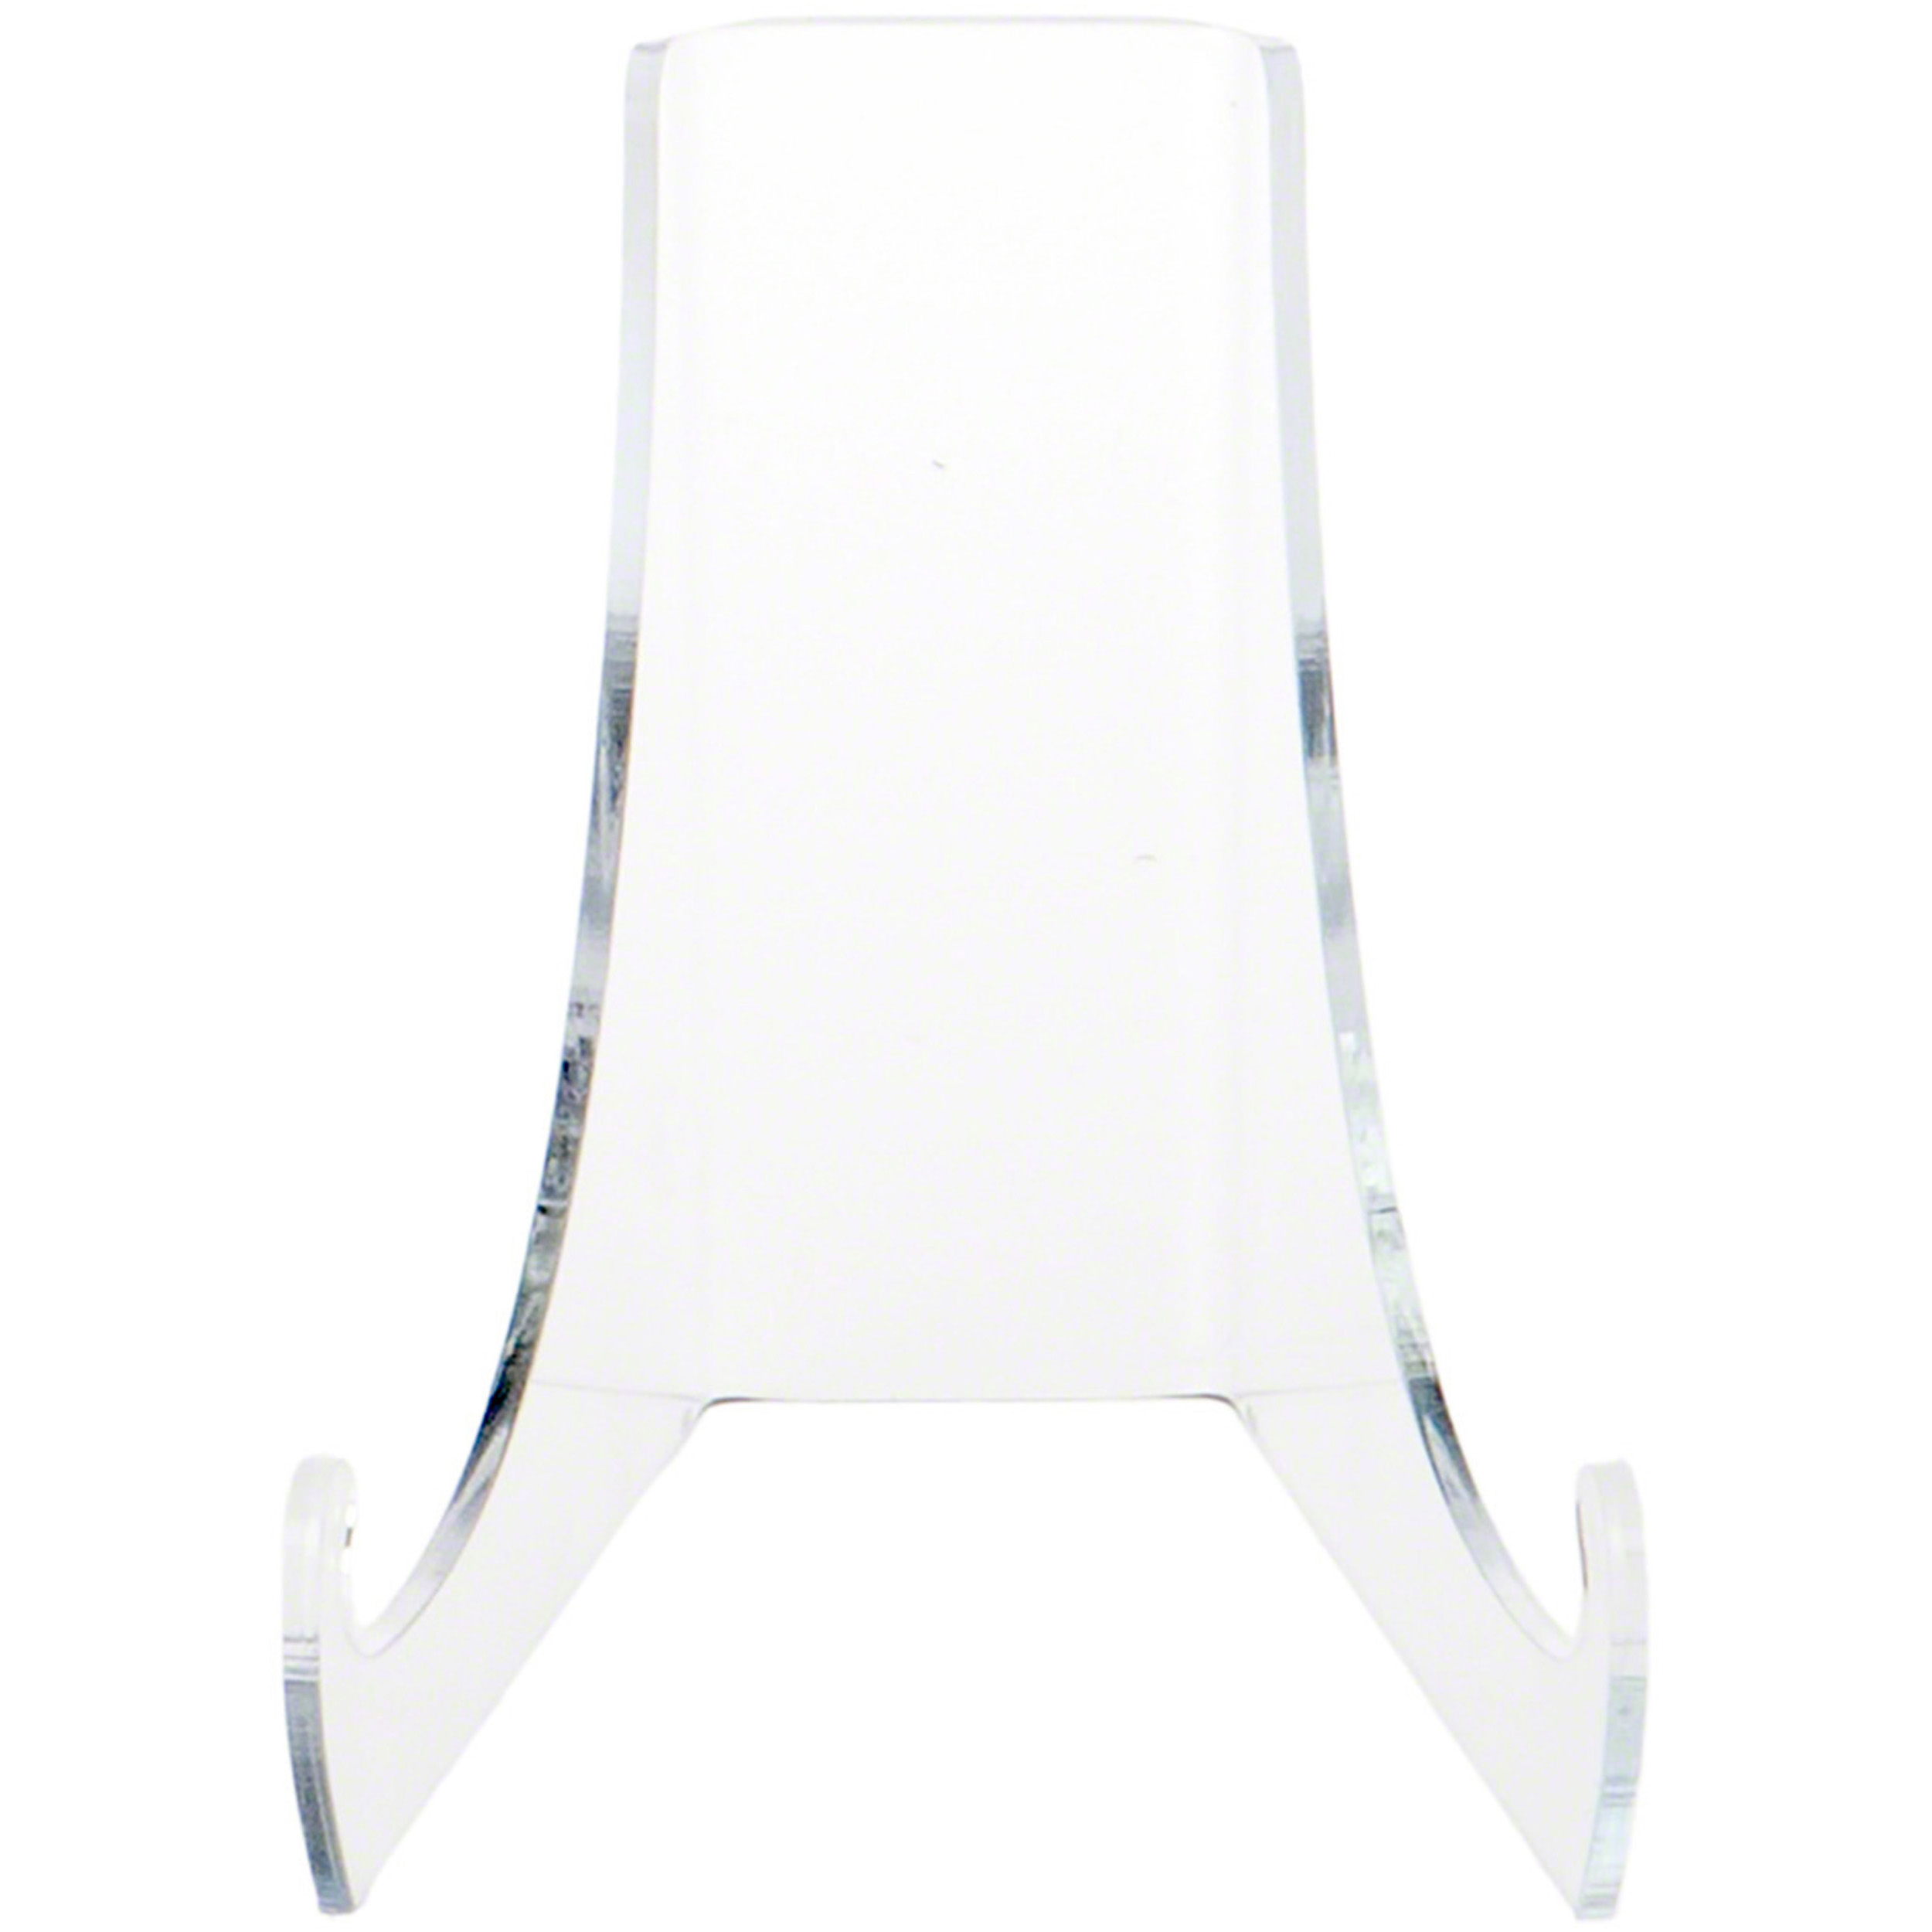 Plymor Clear Acrylic Flat Back Easel With Extra Deep Support Ledges, 4.5" H x 4" W x 5.75" D (2 Pack) - image 1 of 2